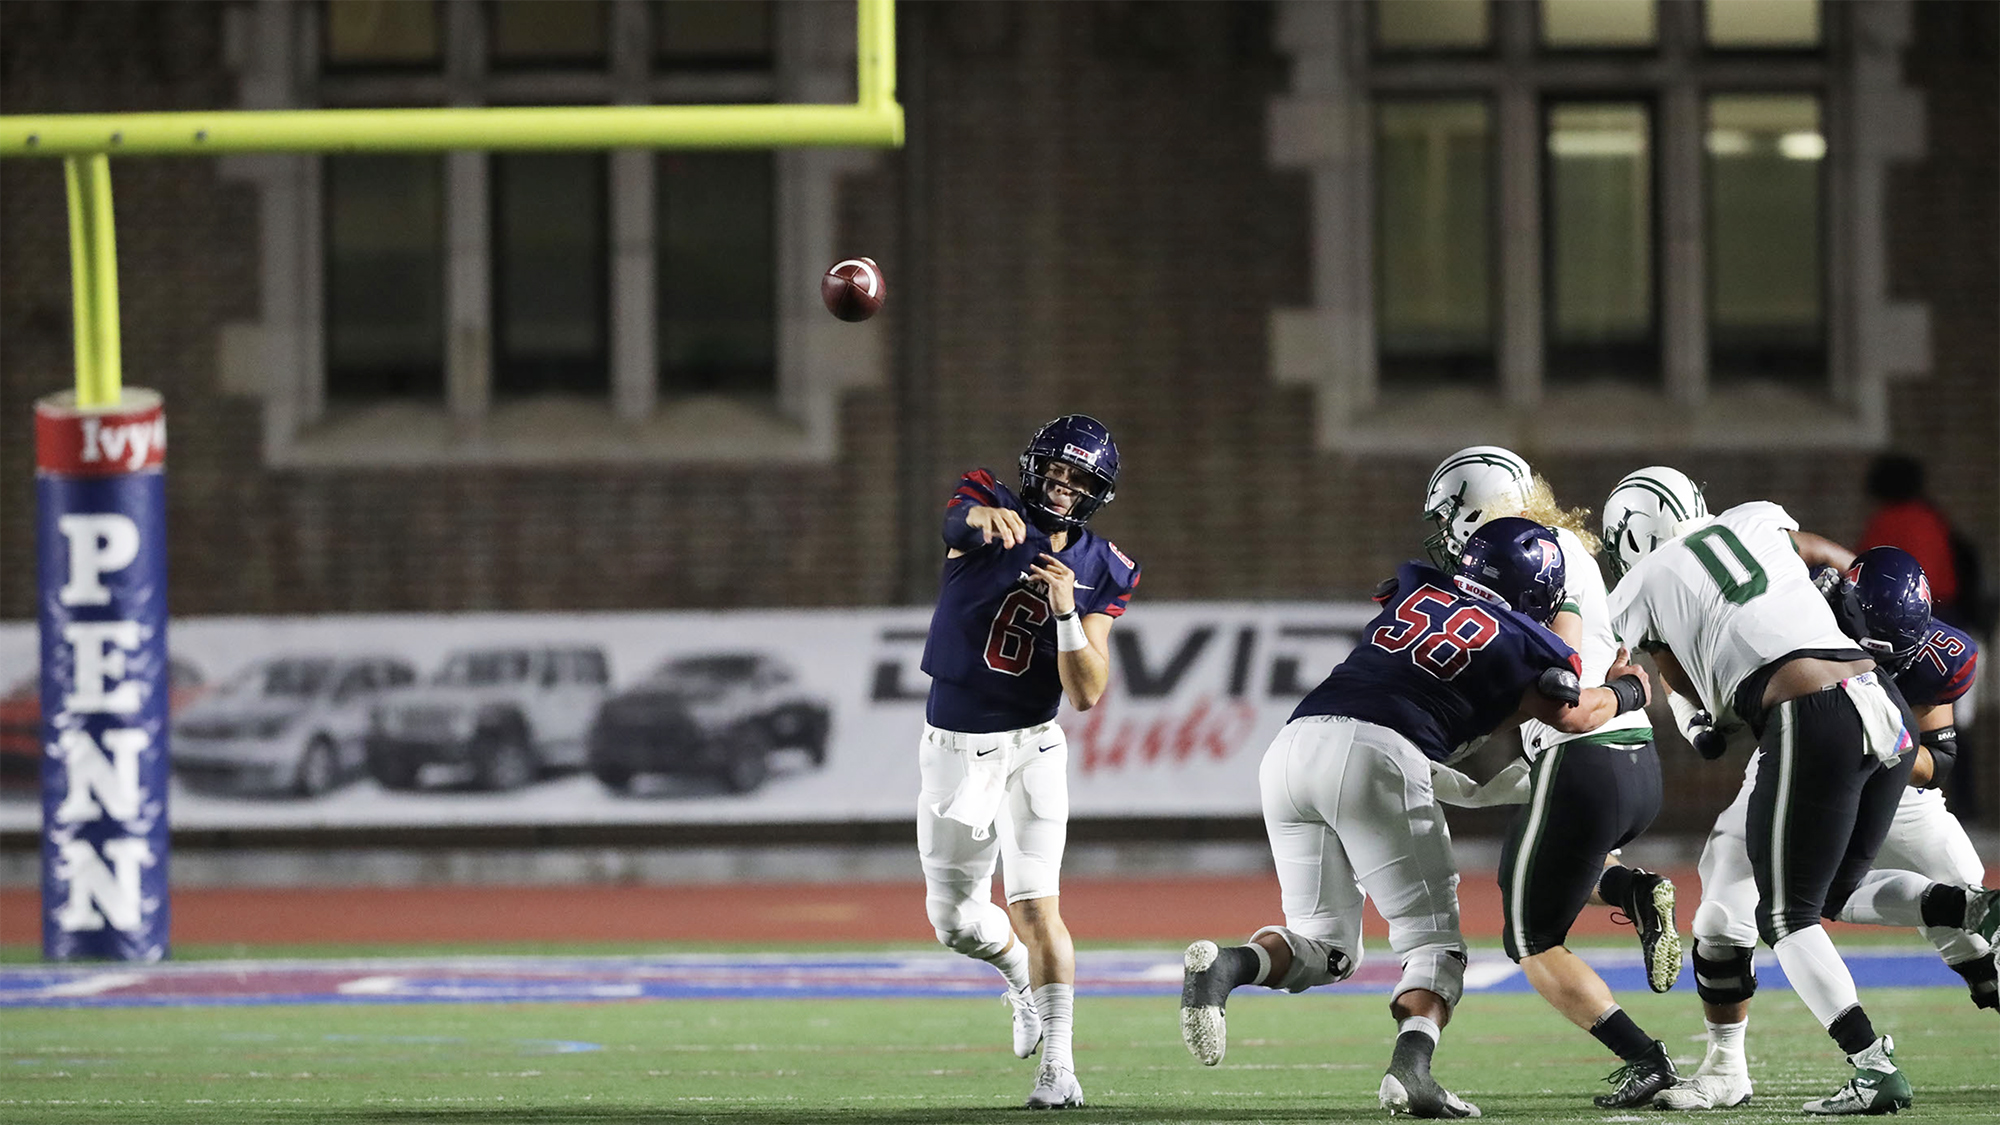 Quarterback John Quinnelly, in the middle of the frame, passes the ball down the field during a game.